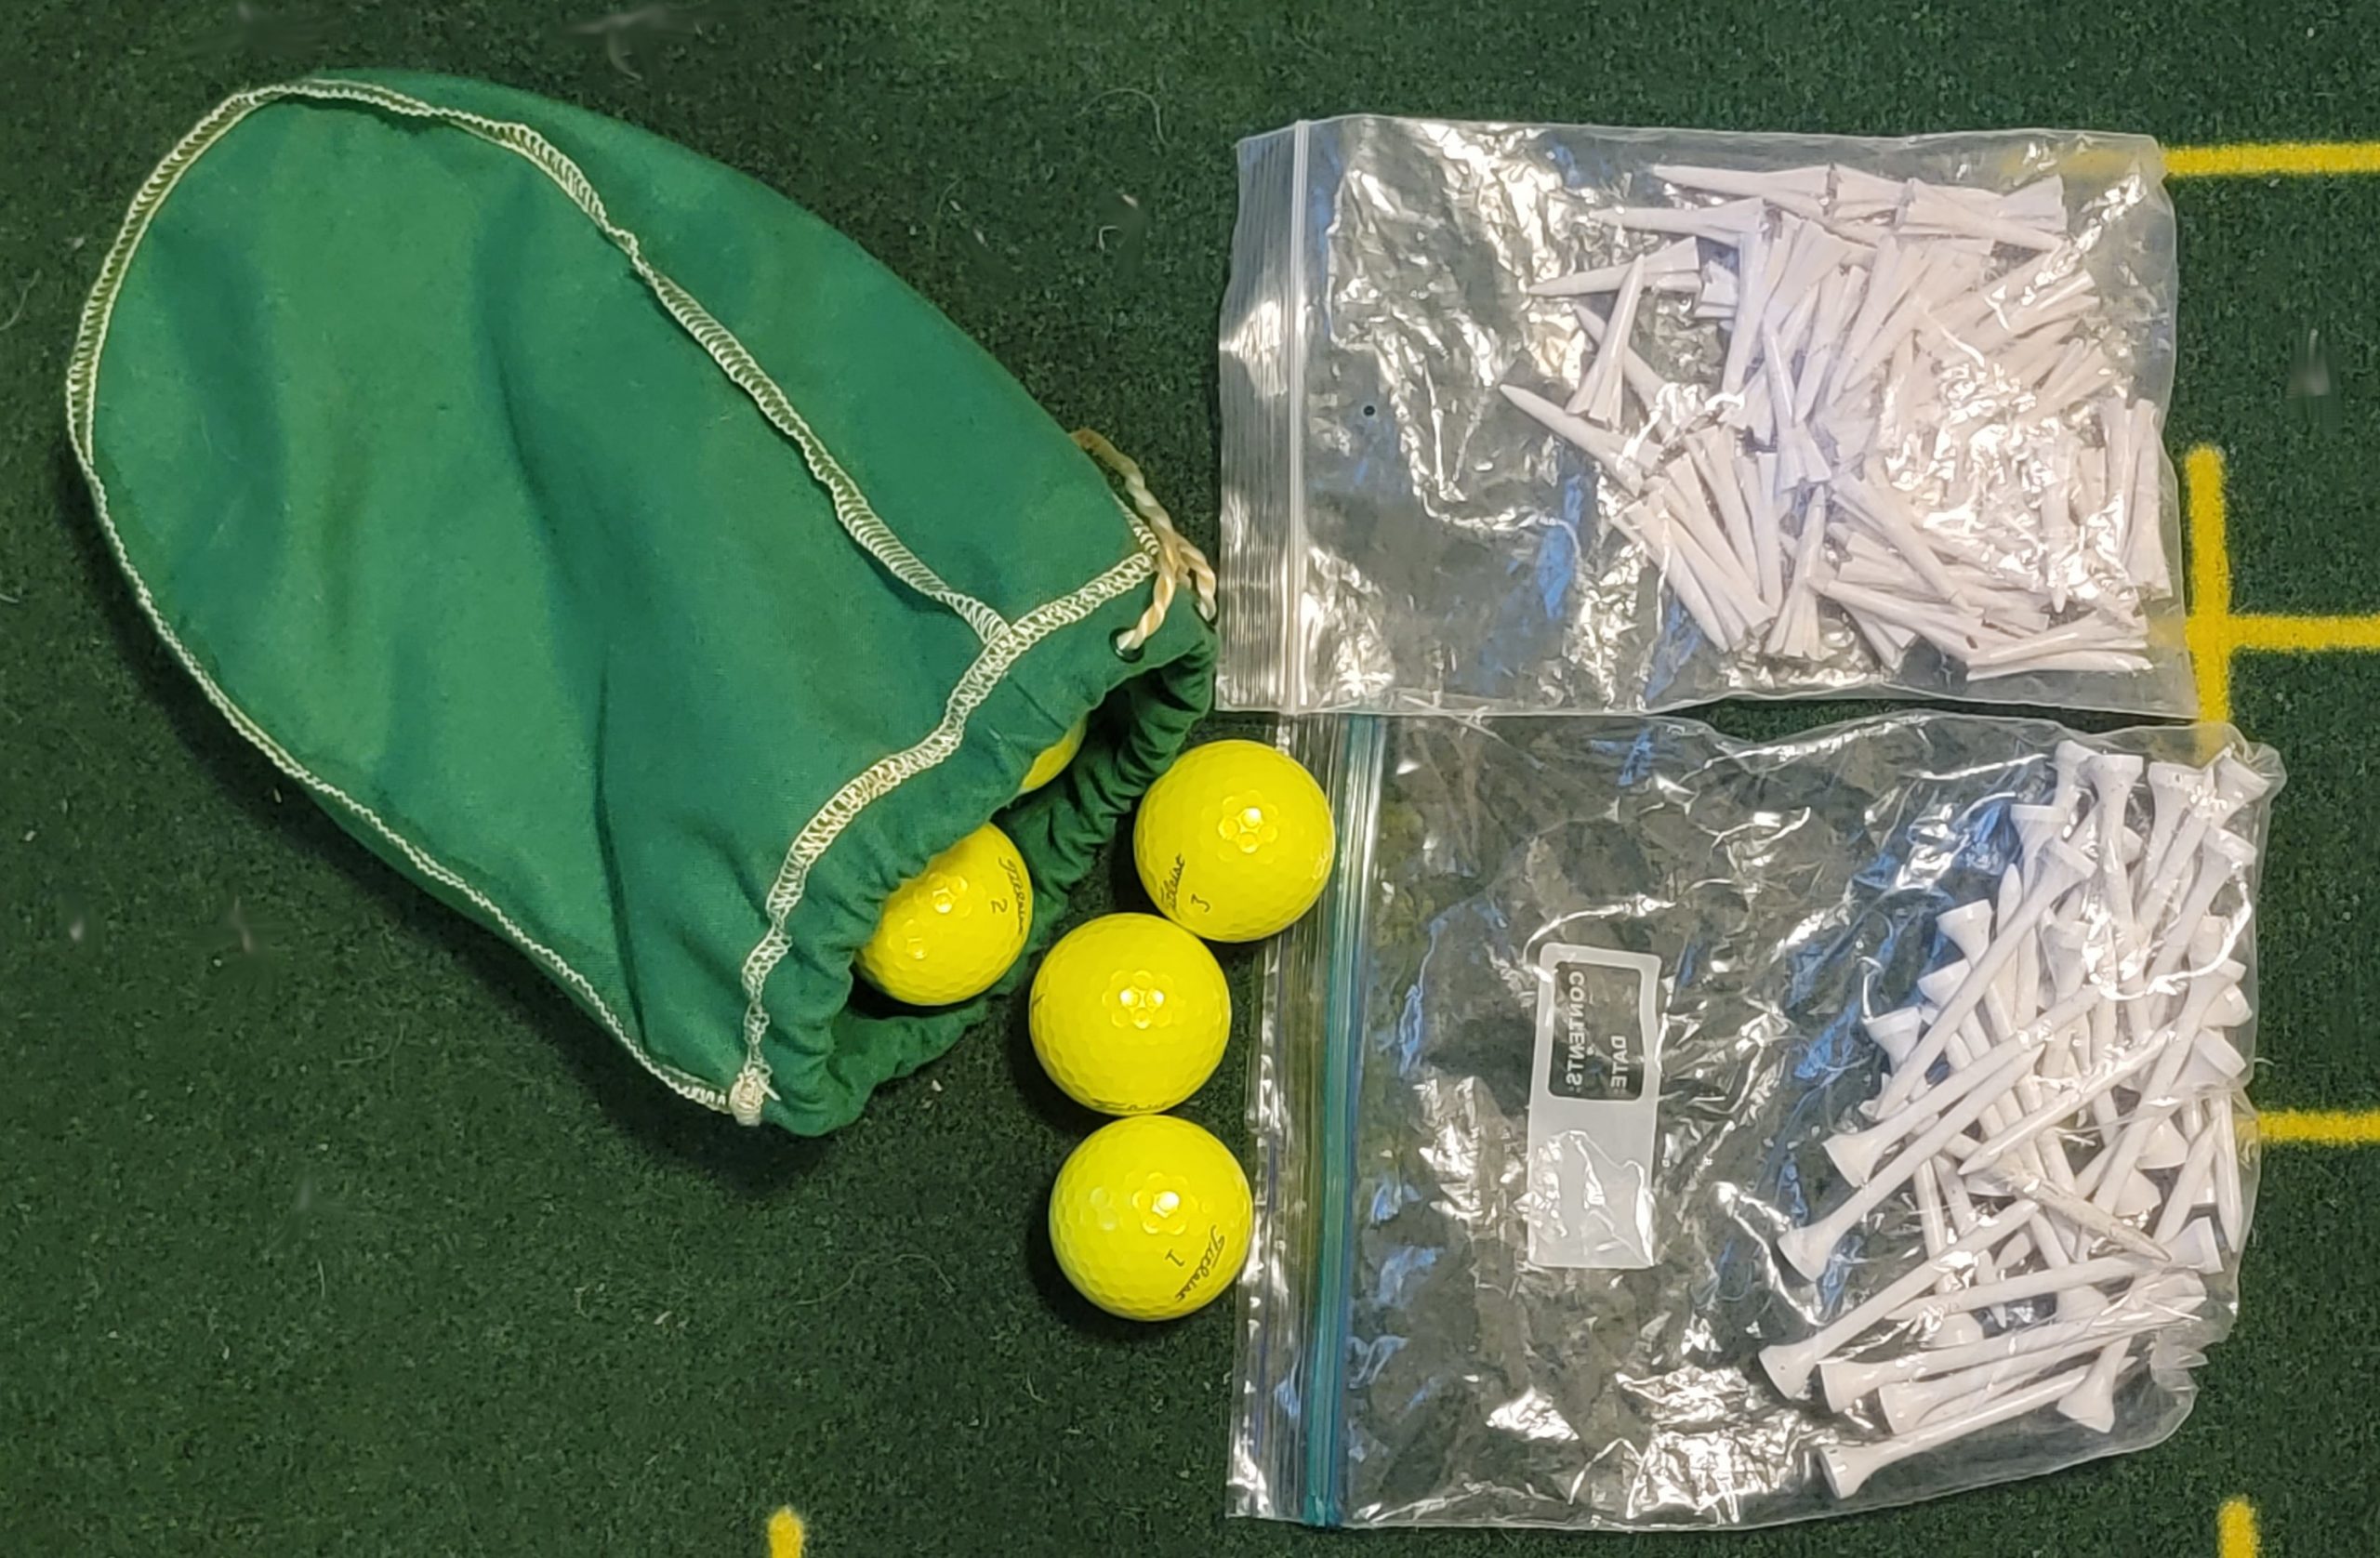 Old Duffer Golf image of extra golf balls and tees